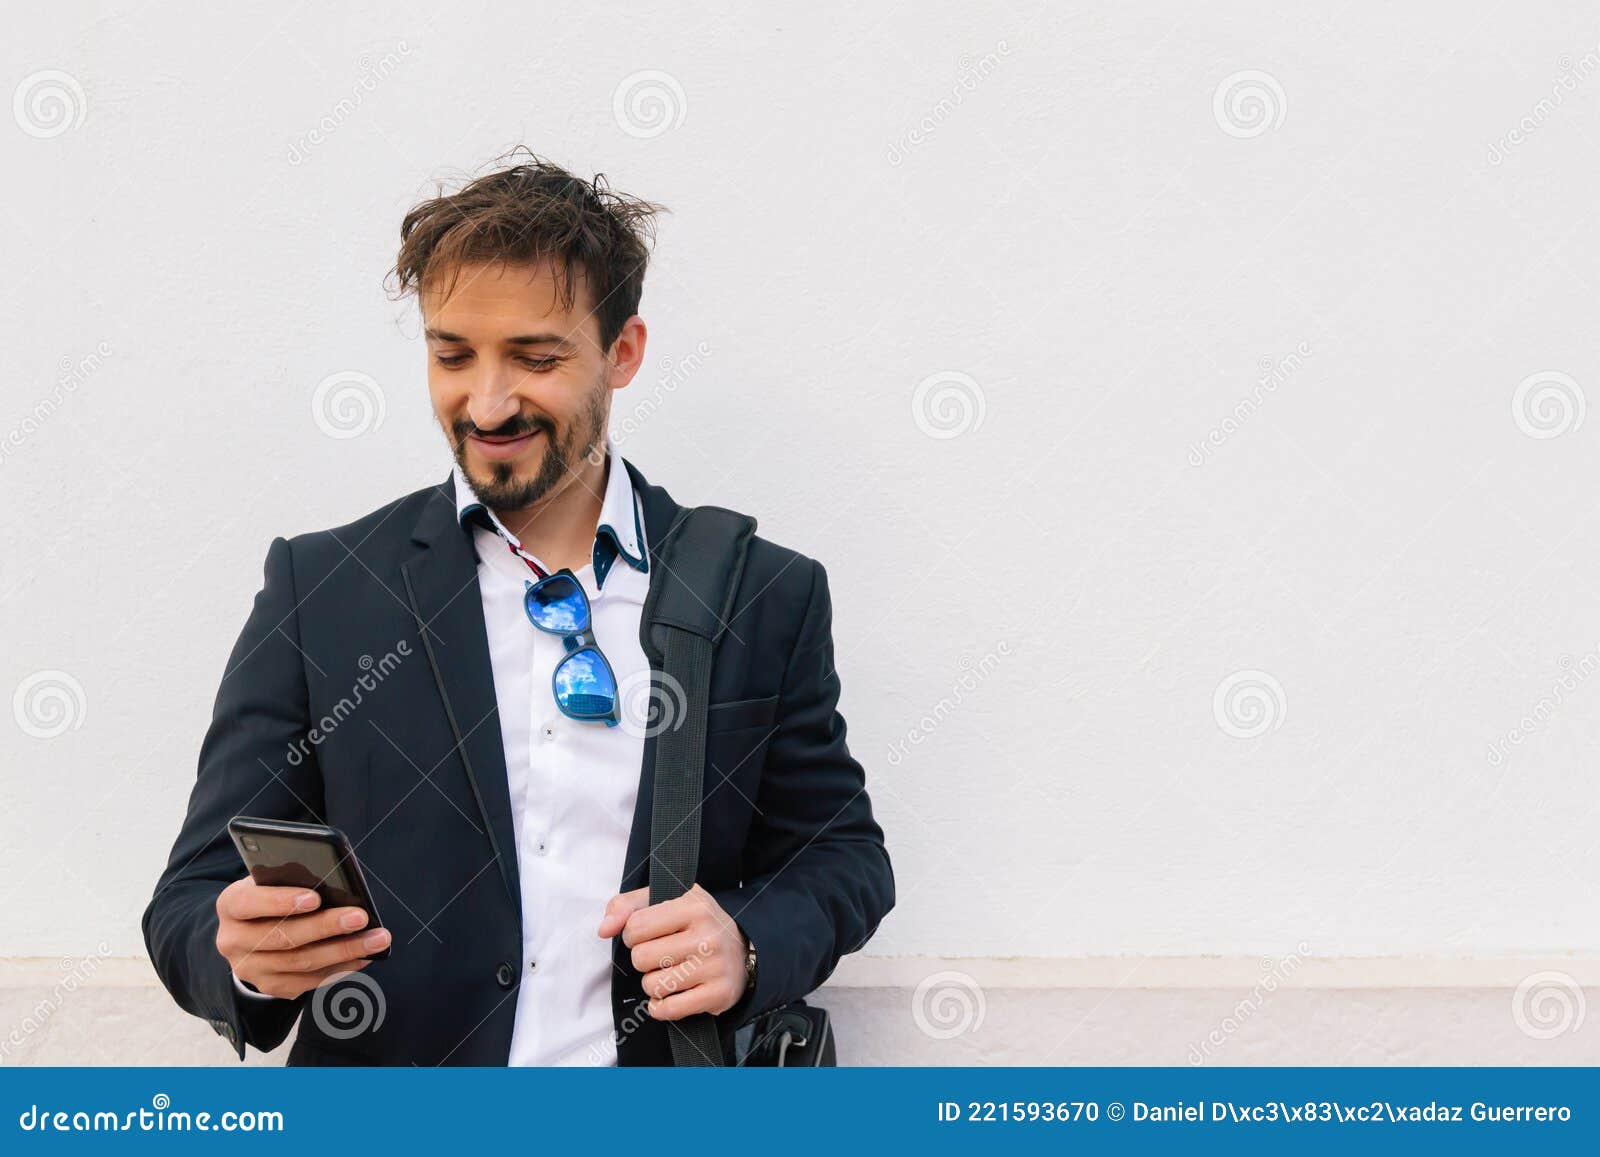 businessman using his smartphone on white background